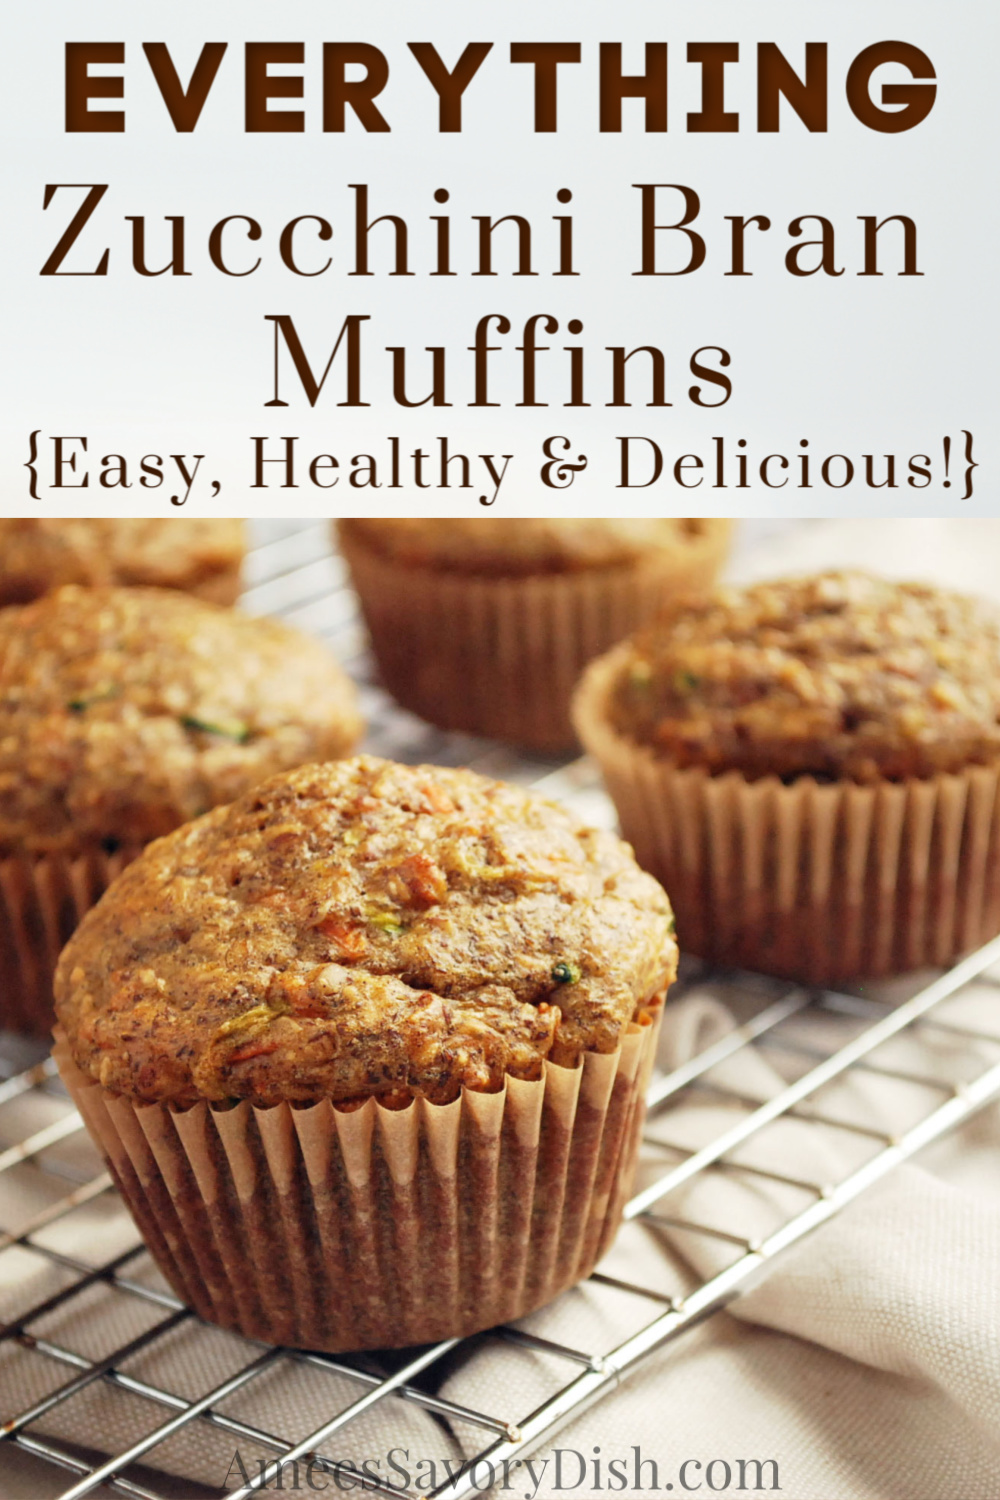 A delicious zucchini bran muffins recipe made with shredded zucchini and carrots, unbleached flour, ground flaxseed, oat bran, raisins, and walnuts.  This healthier muffin recipe is simple and incredibly delicious!  #branmuffins #zucchinimuffins #everythingmuffins #carrotmuffins #muffinsrecipe #healthymuffinrecipe #muffins via @Ameessavorydish